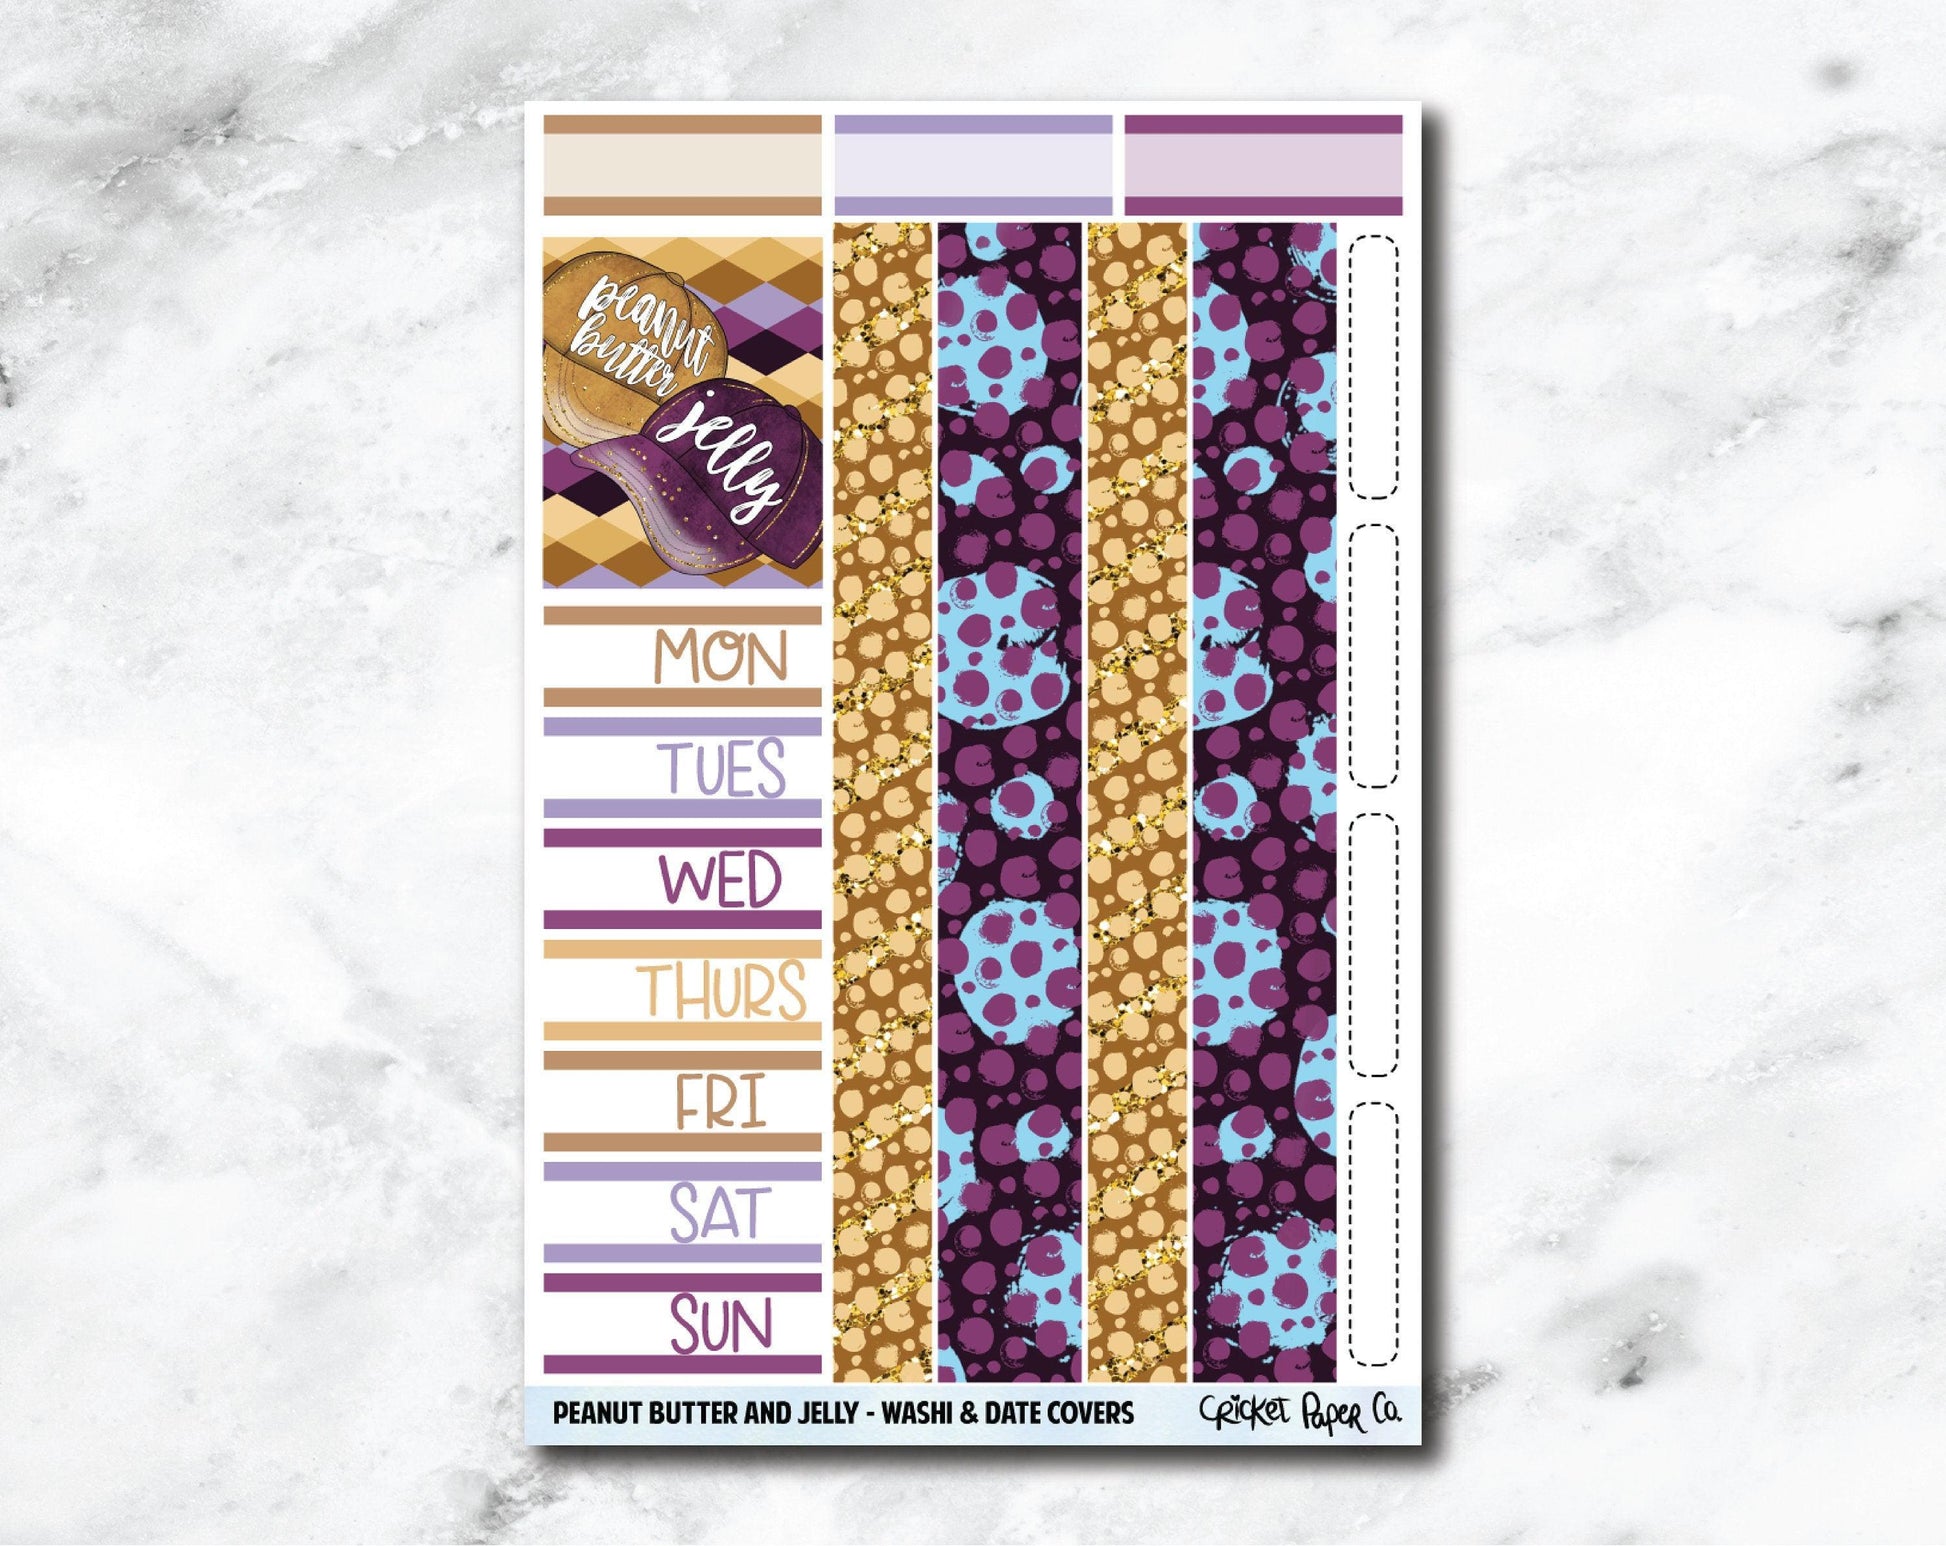 Date Covers and Bottom Washi Planner Stickers - Peanut Butter and Jelly-Cricket Paper Co.